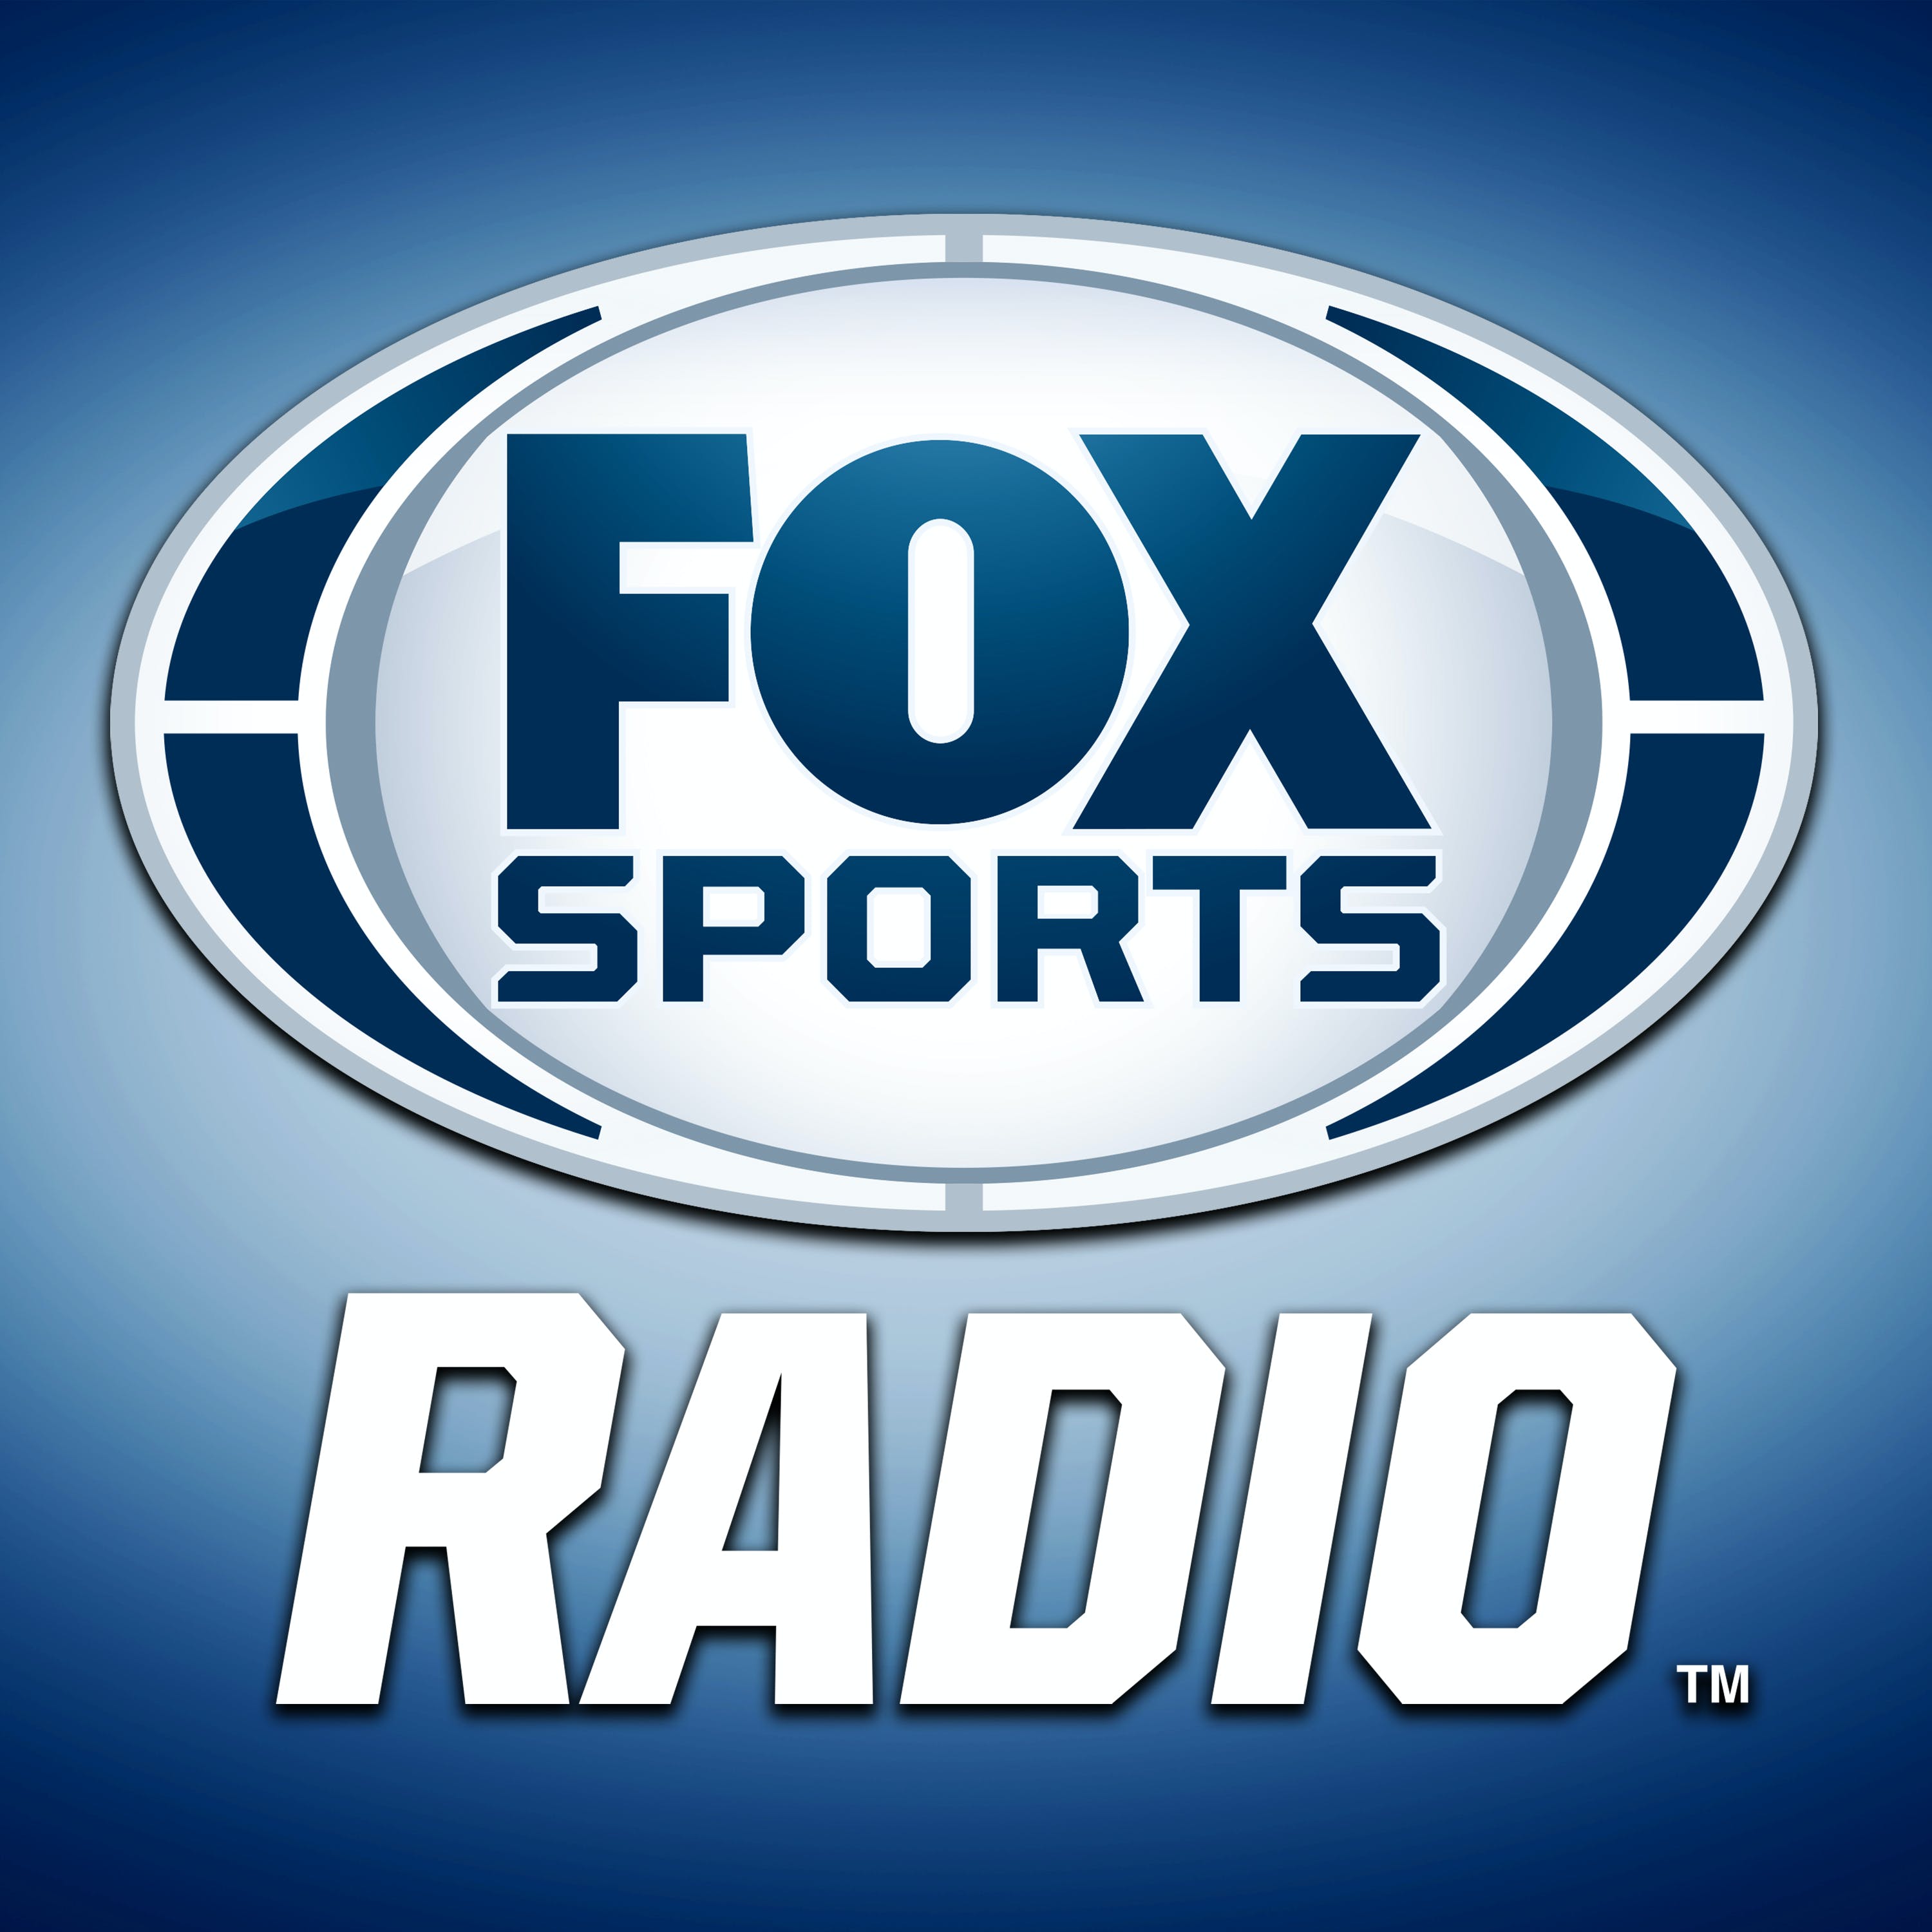 11/08/2020 FOX Sports Red Zone Radio with Beyer and Wrighster- NFL Week 9 highlights and analysis, Chris Myers, Adam Caplan